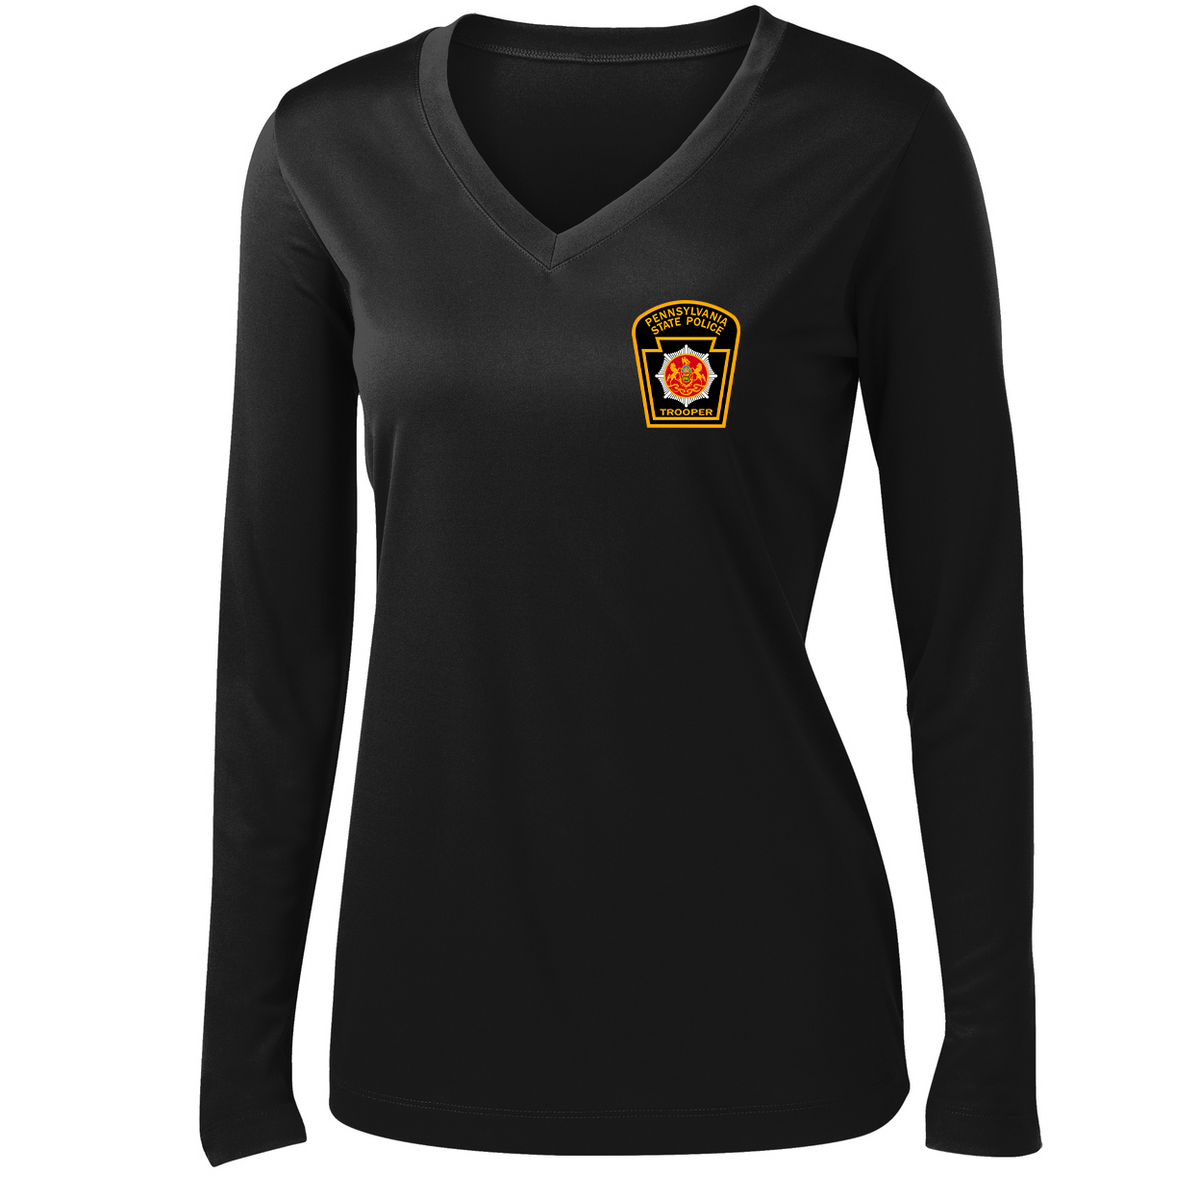 PA State Police Women's Long Sleeve Performance Shirt